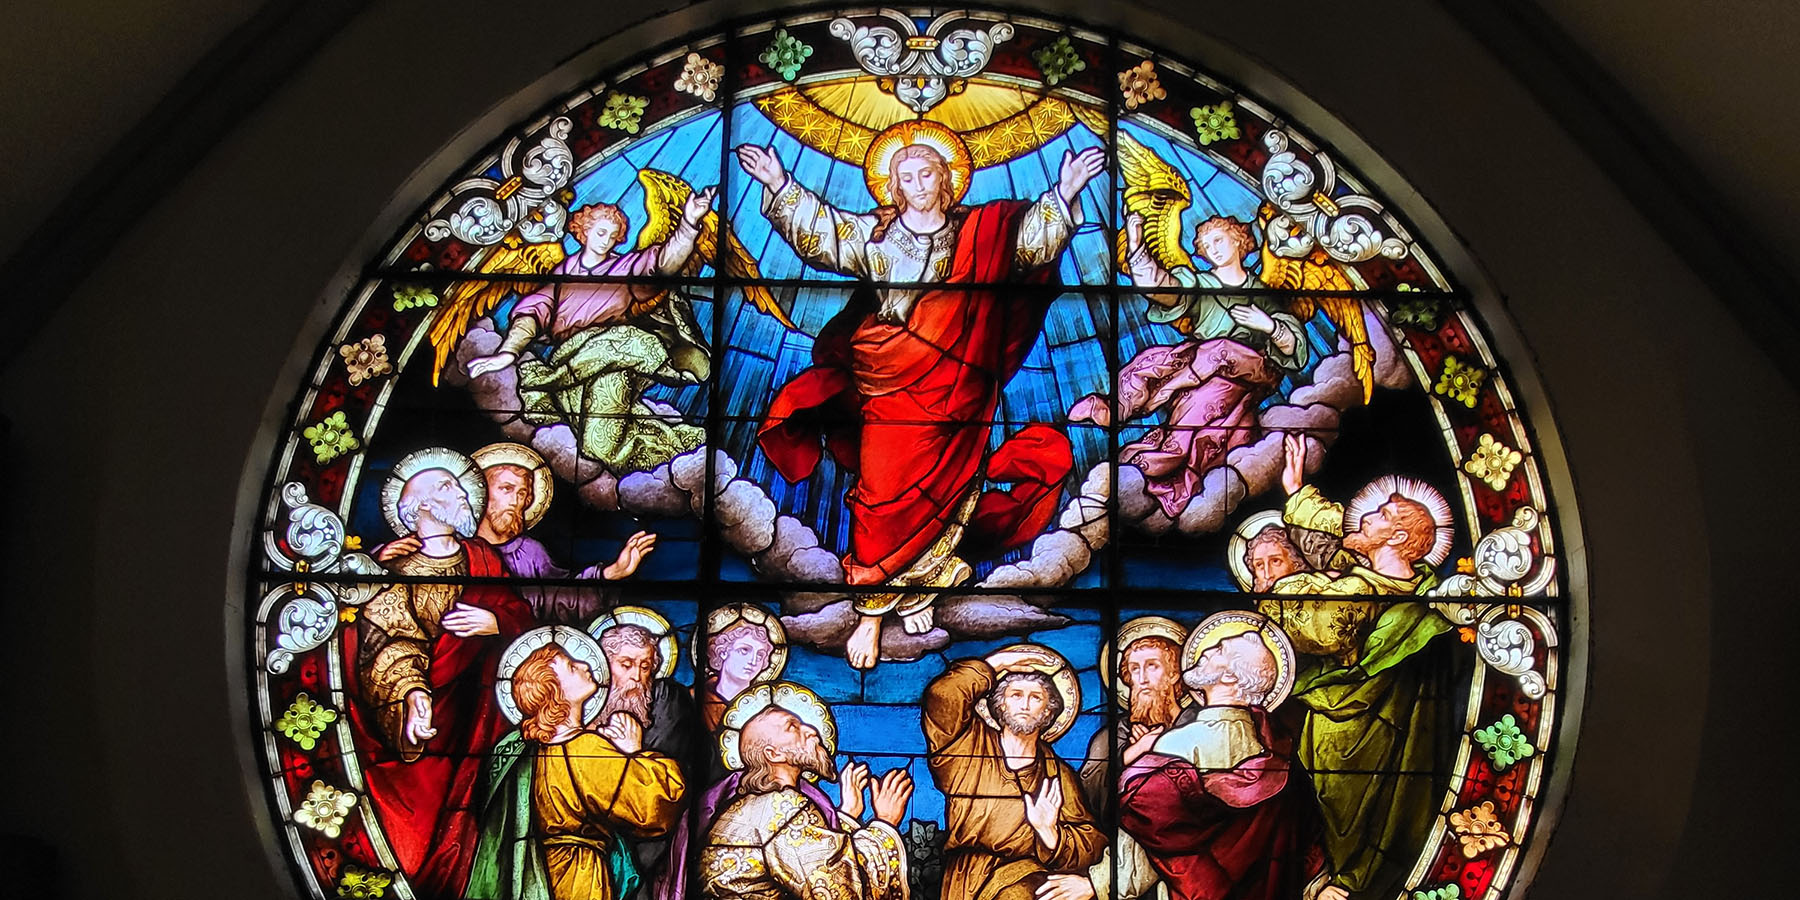 Ascension window in the choir loft of the church (photo by Jeremy Bailey)